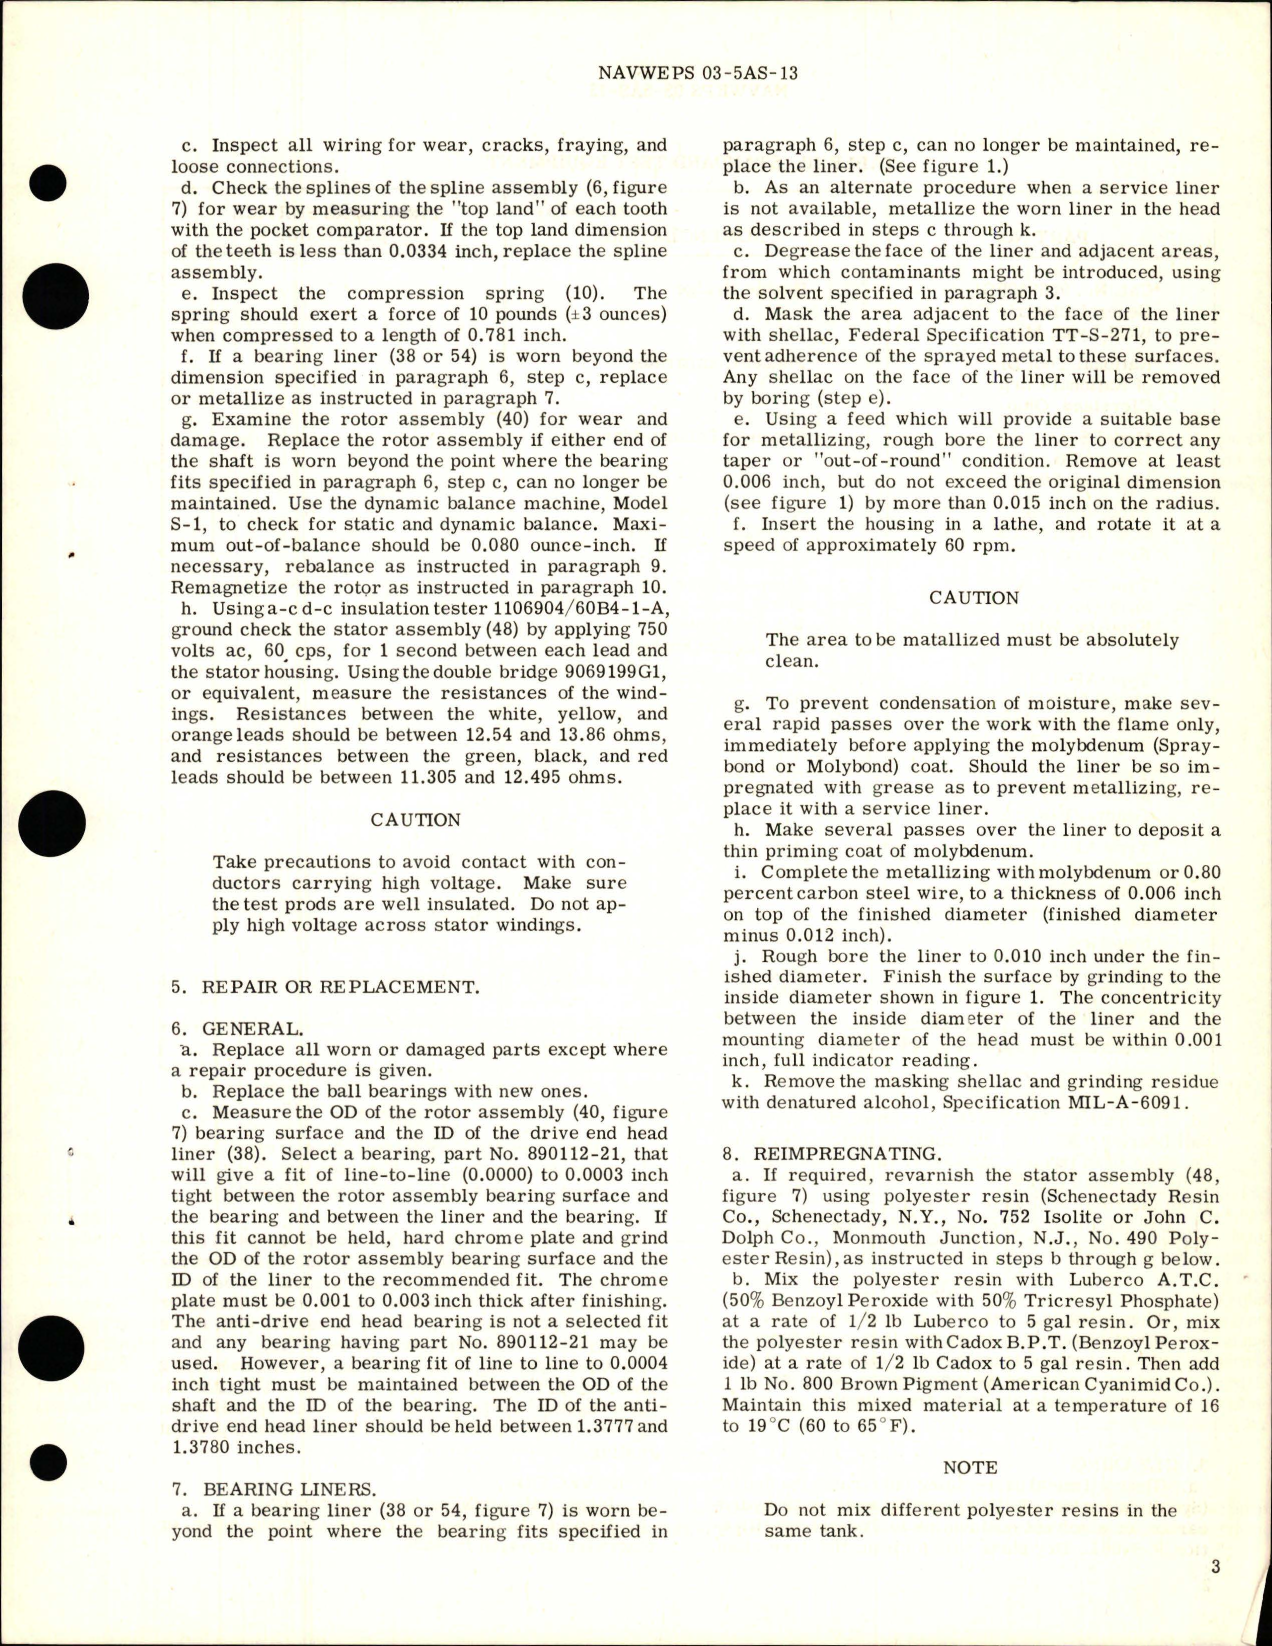 Sample page 5 from AirCorps Library document: Overhaul Instructions with Parts Breakdown for Generator Assembly - Type 28E04-1-E 